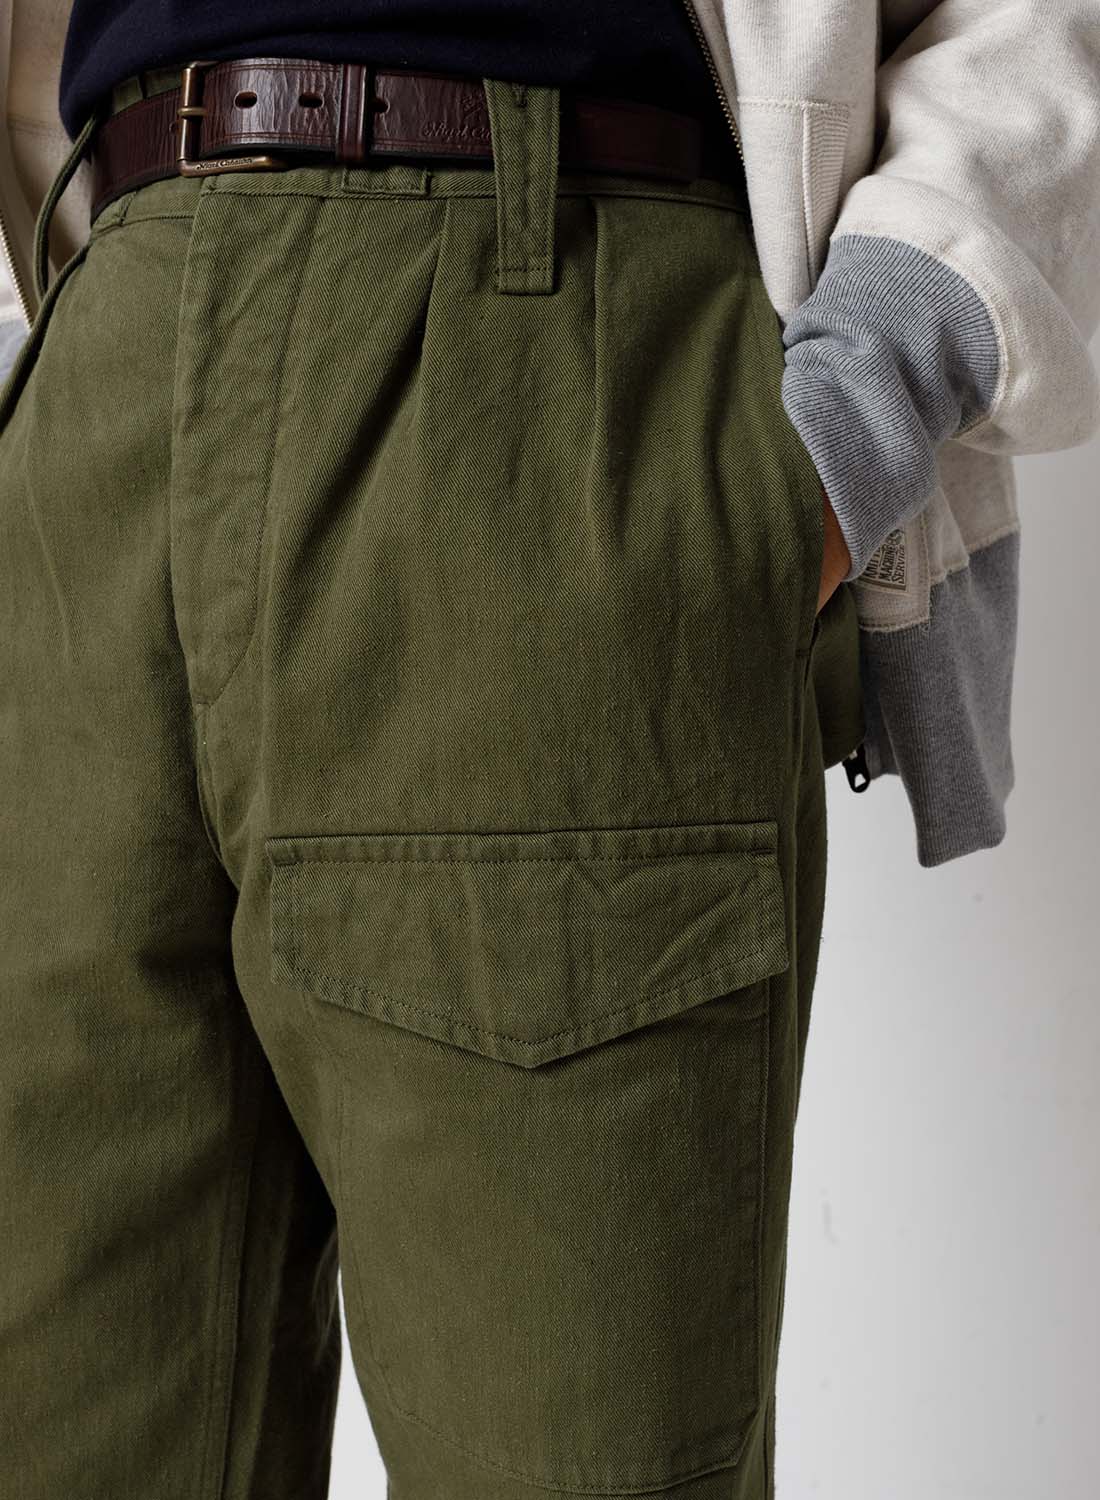 Army Green Cargo Pants Women  Goes Army Green Pants  Fashion Army Green  Pants Women  Pants  Capris  Aliexpress